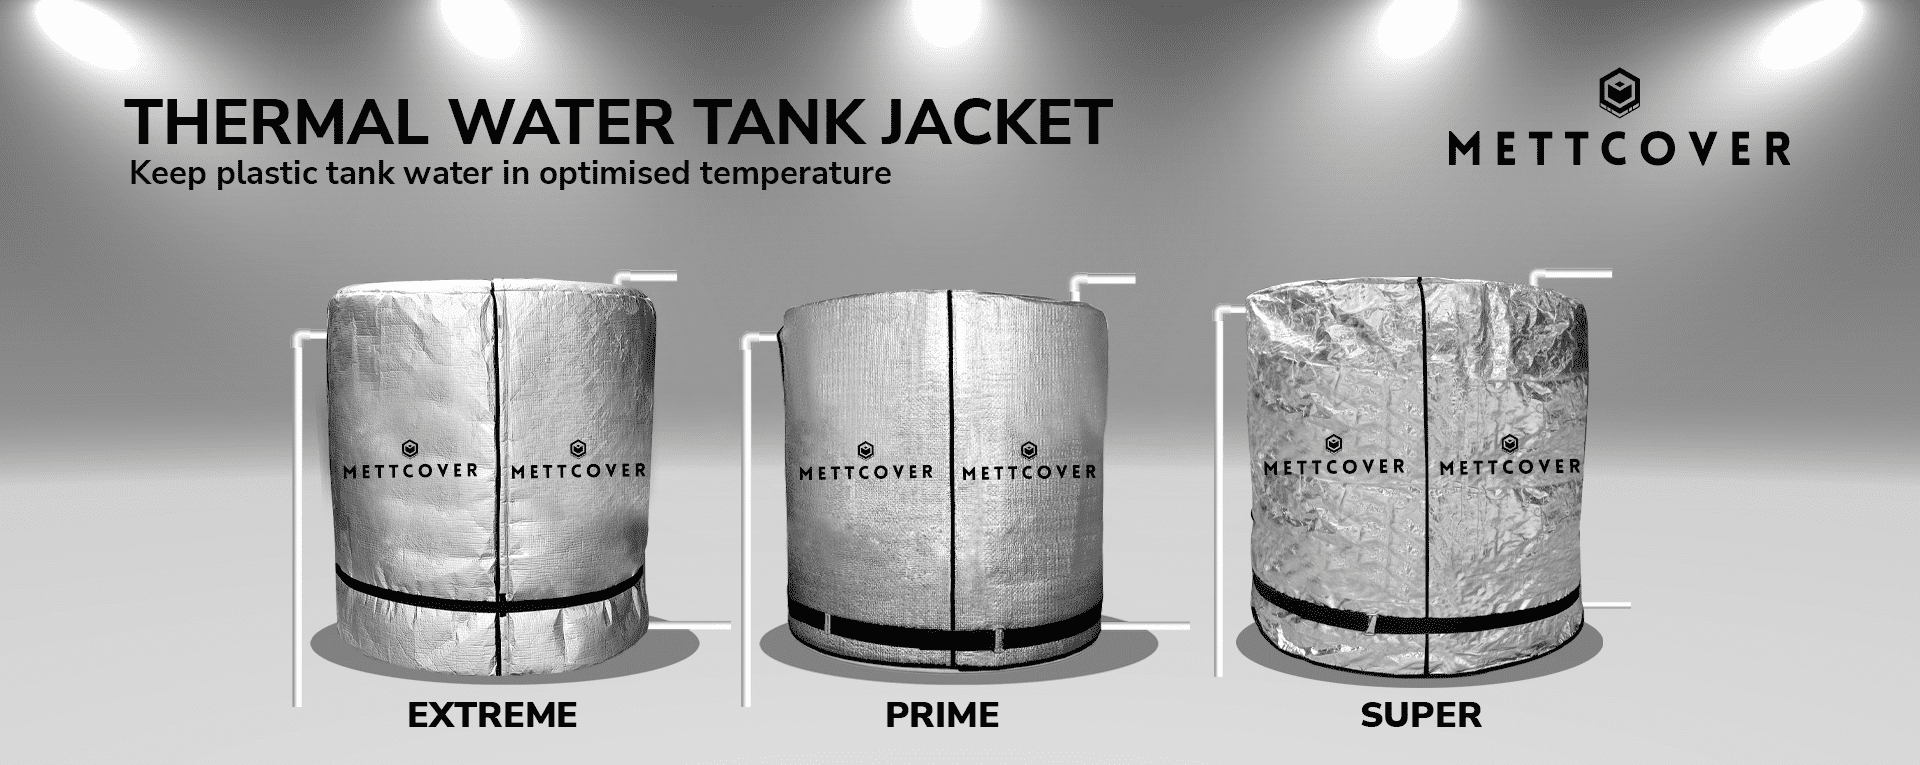 Thermal Water Tank Jacket, Water Tank Insulation Covers for Heat